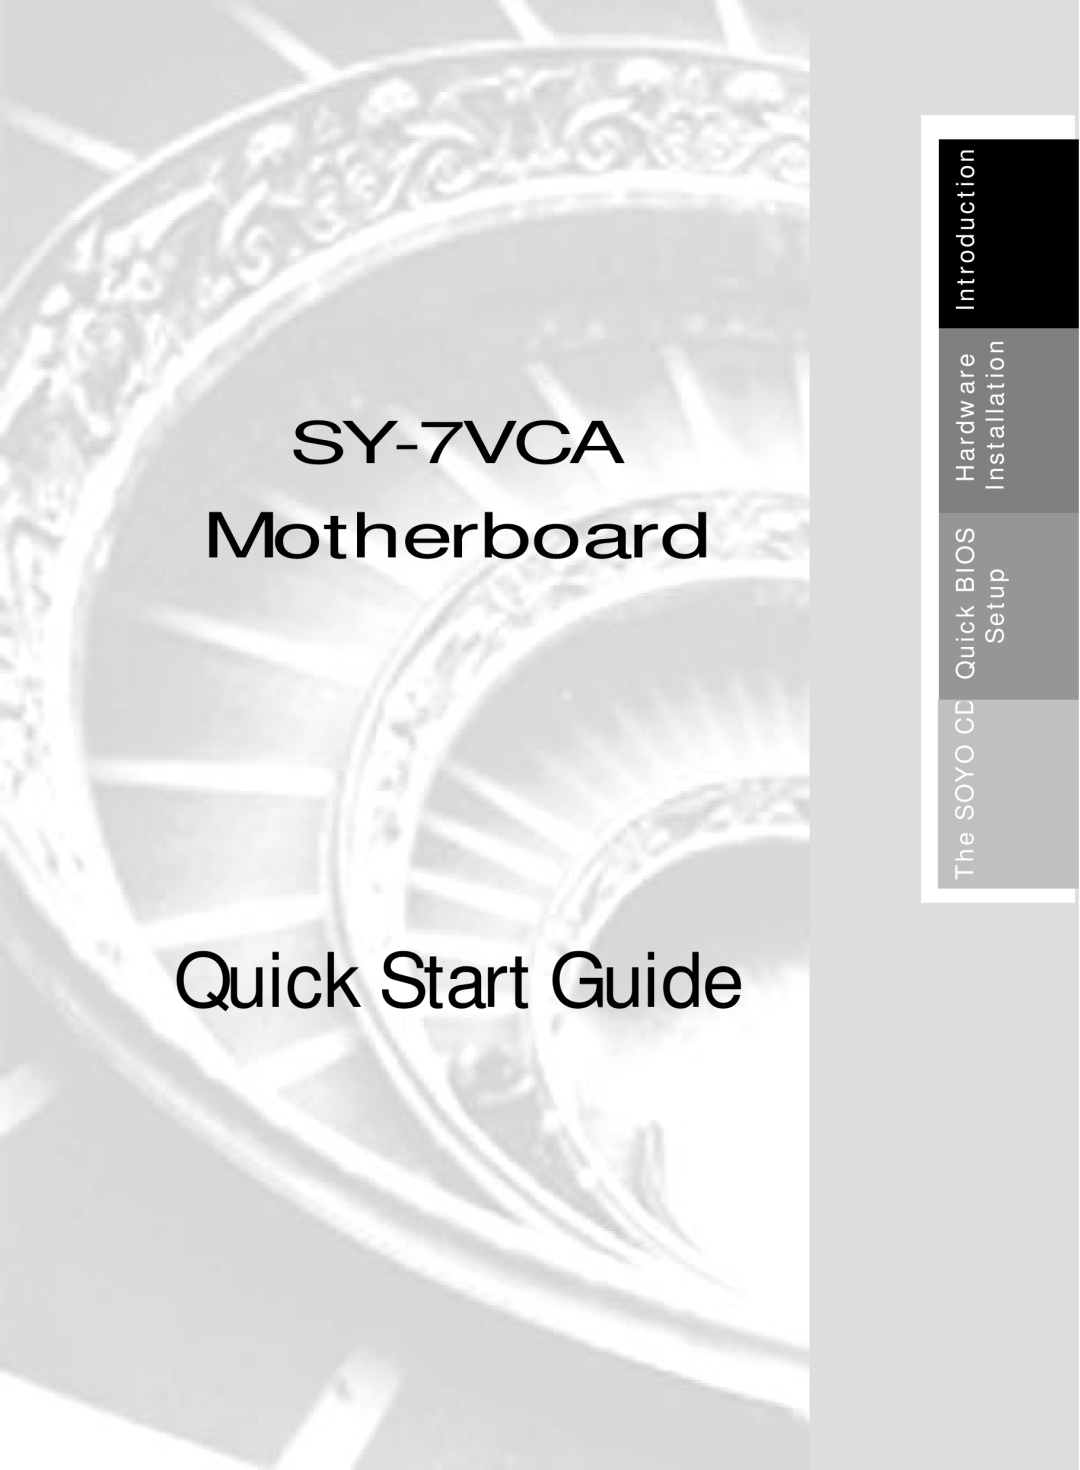 SOYO SY-7VCA quick start Introduction, Hardware, Installation, Quick BIOS, Setup, The SOYO CD, Quick Start Guide 